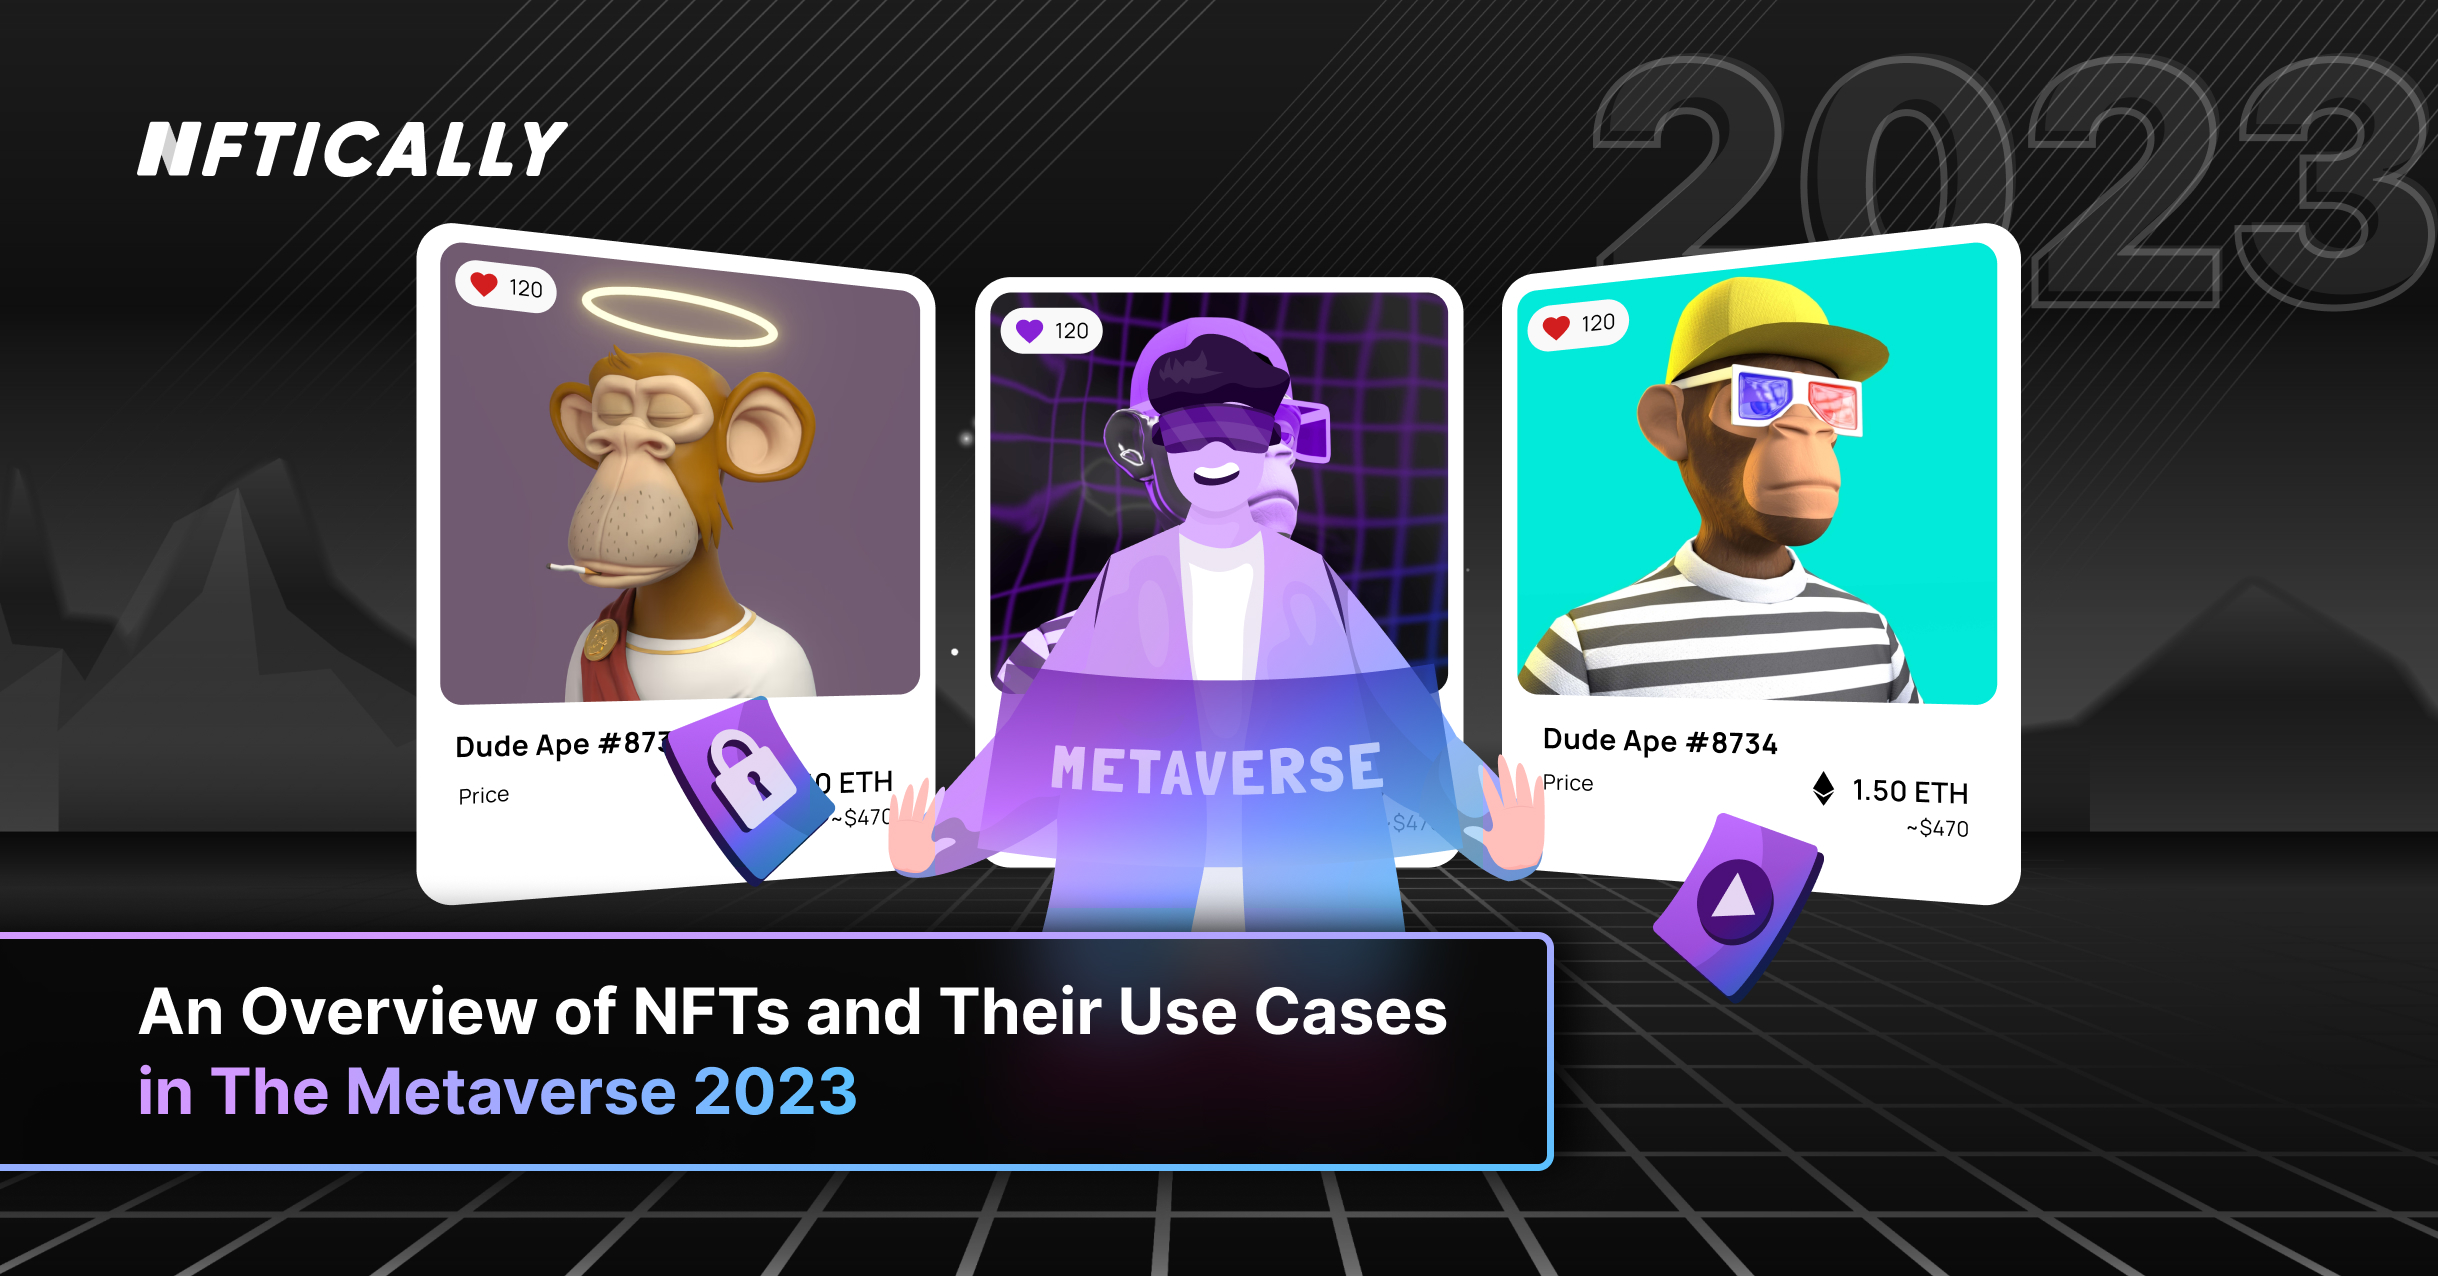 An Overview of NFTs and Their Use Cases in The Metaverse 2023